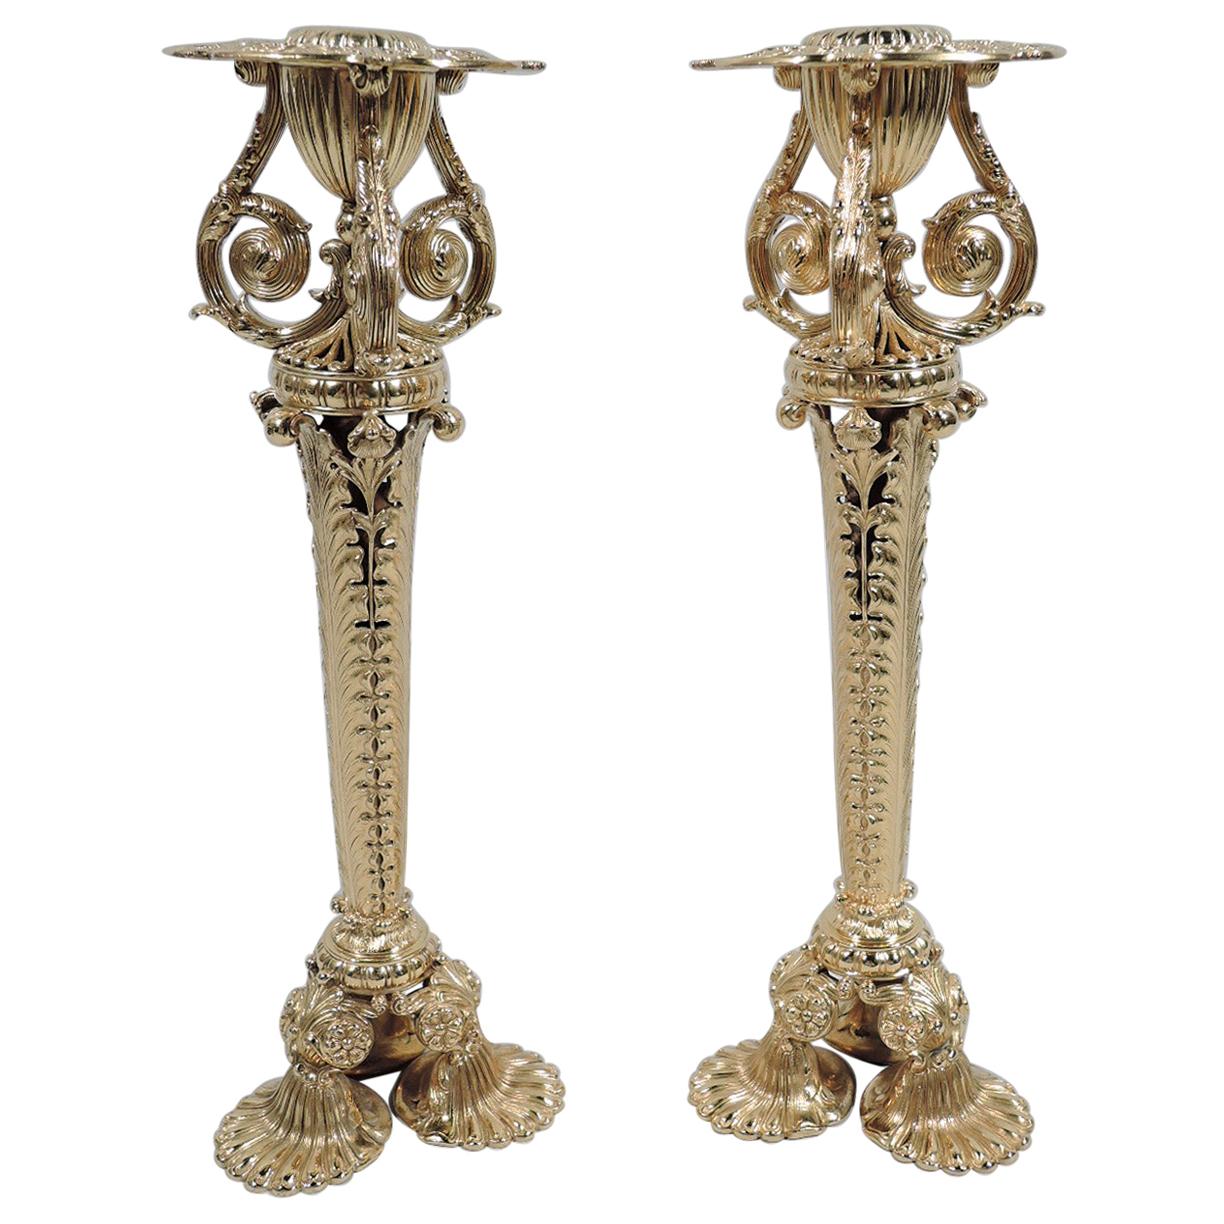 Pair of Tiffany Exuberantly Classical Paris Exposition Universelle Candlesticks